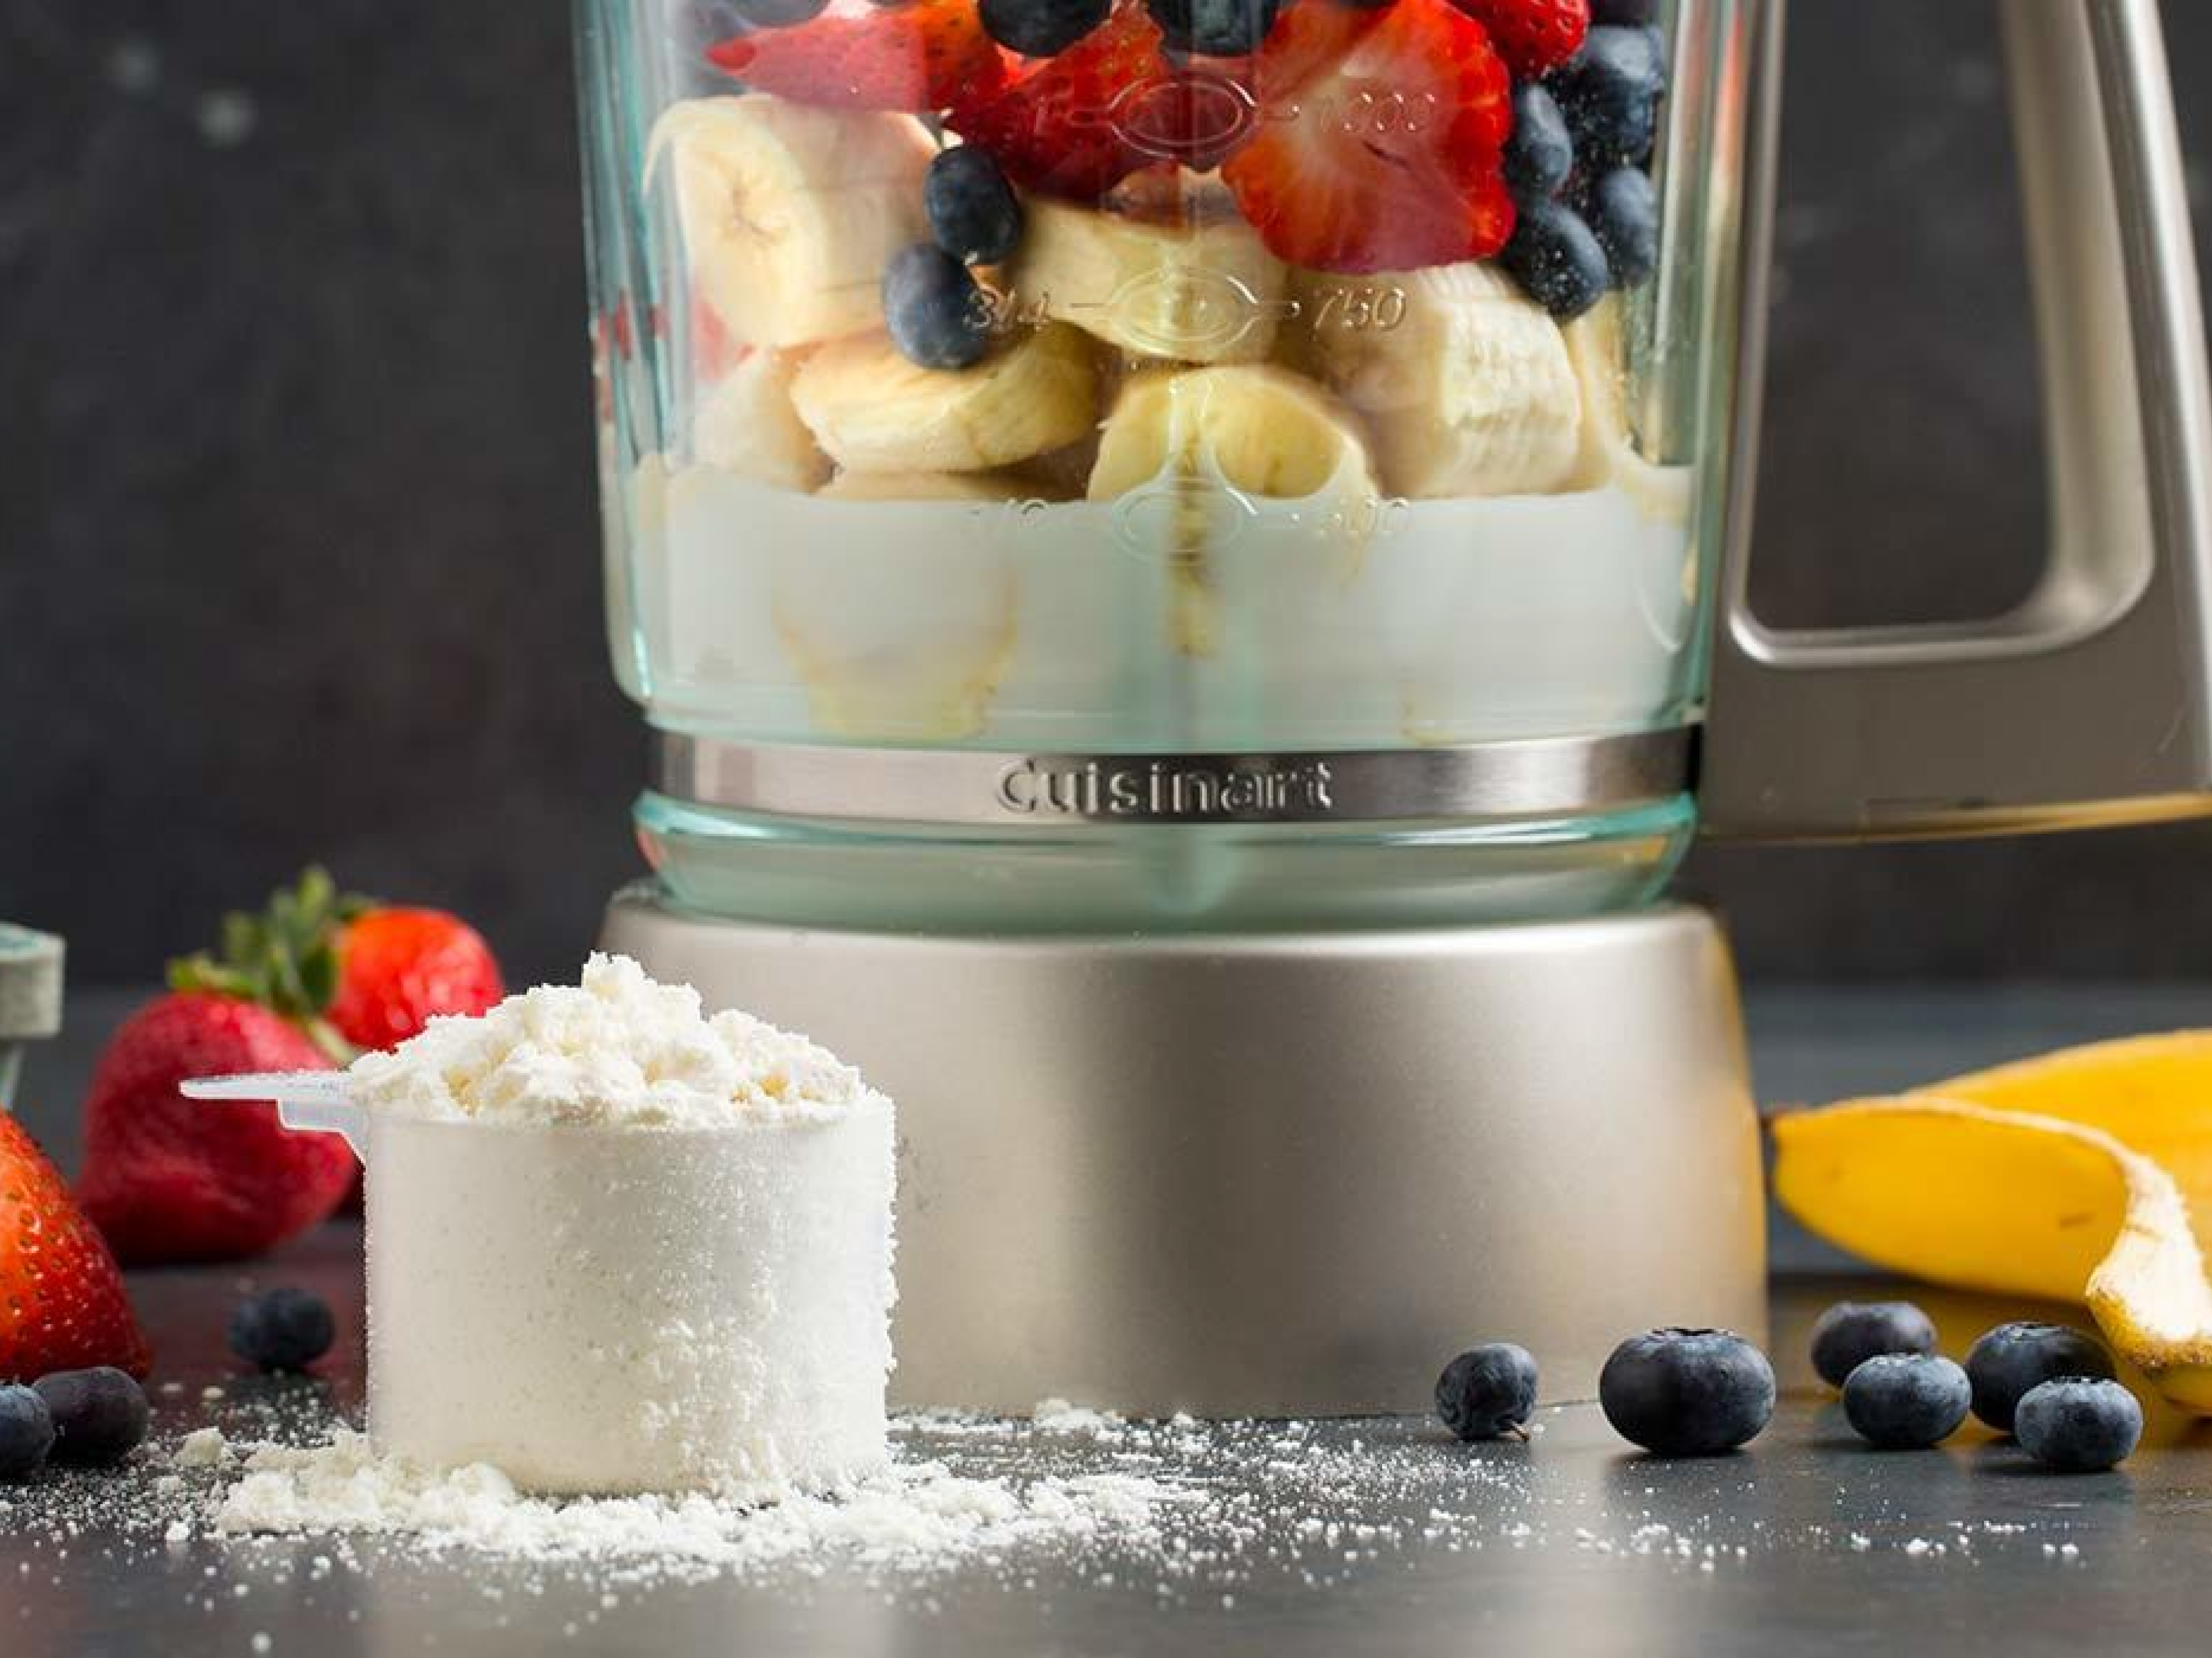 Protein powder next to a blender with fruit